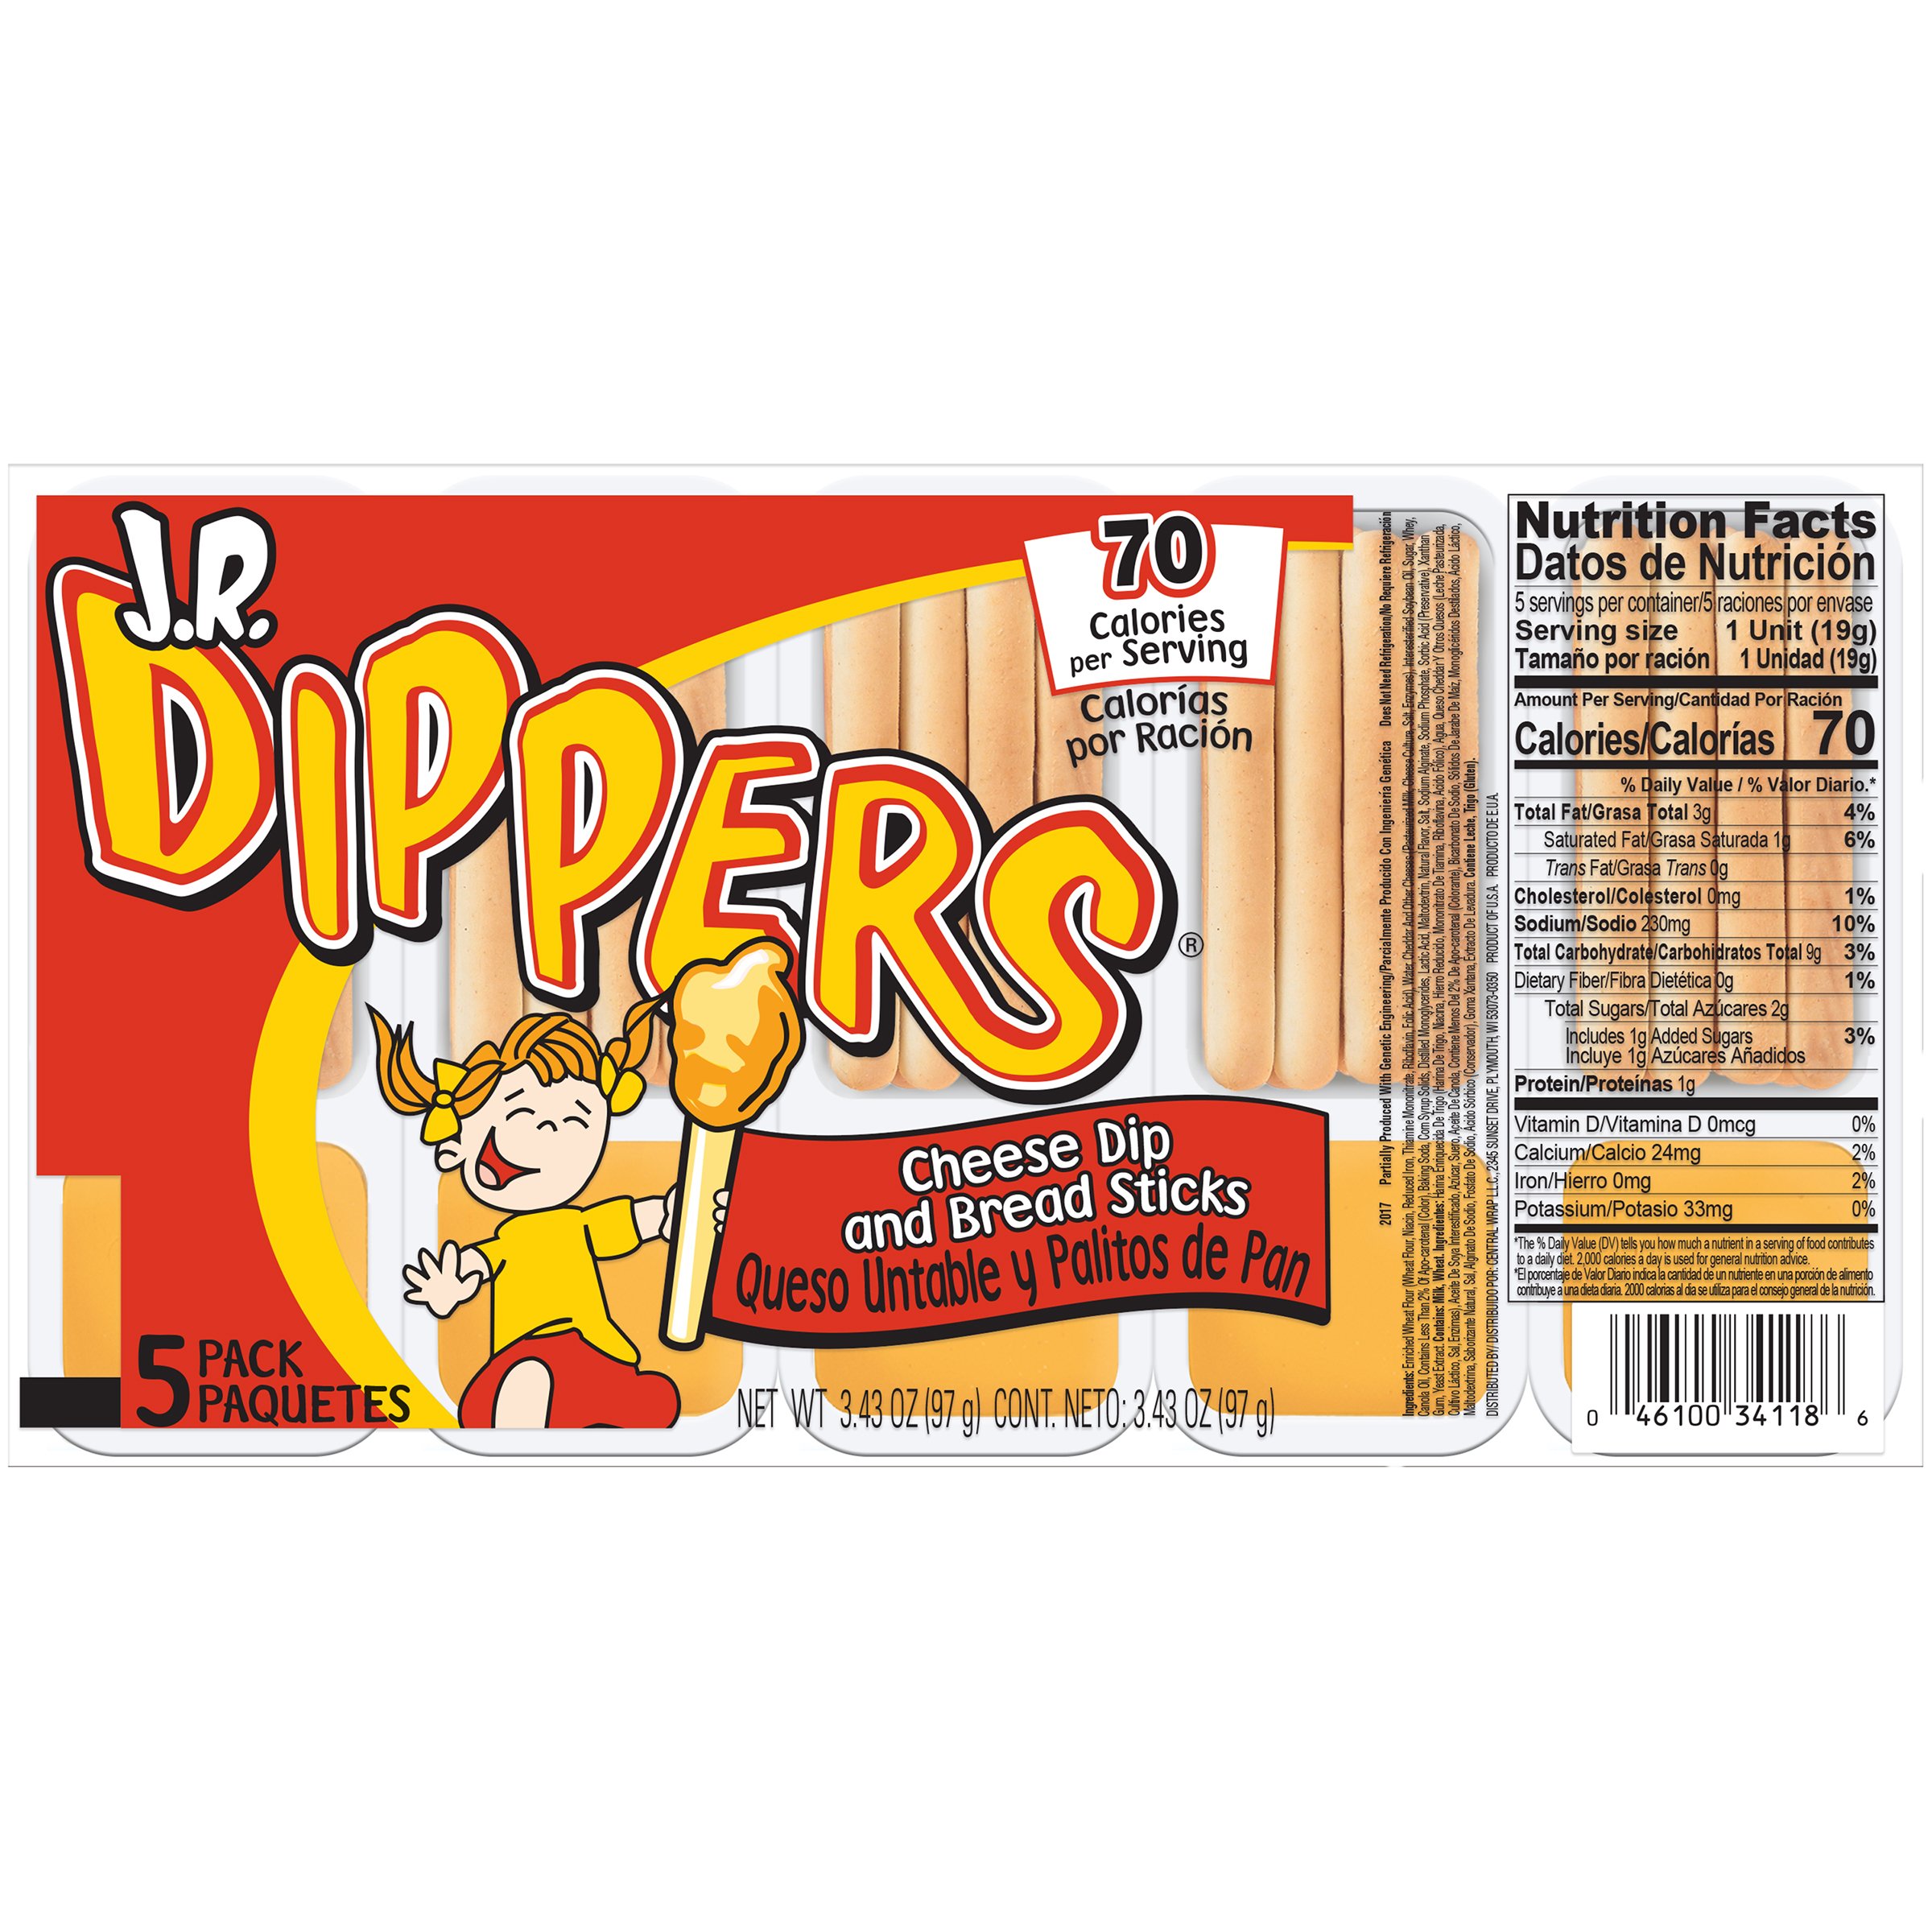 is jr. dippers cheese dip with sticks halal in the United States?